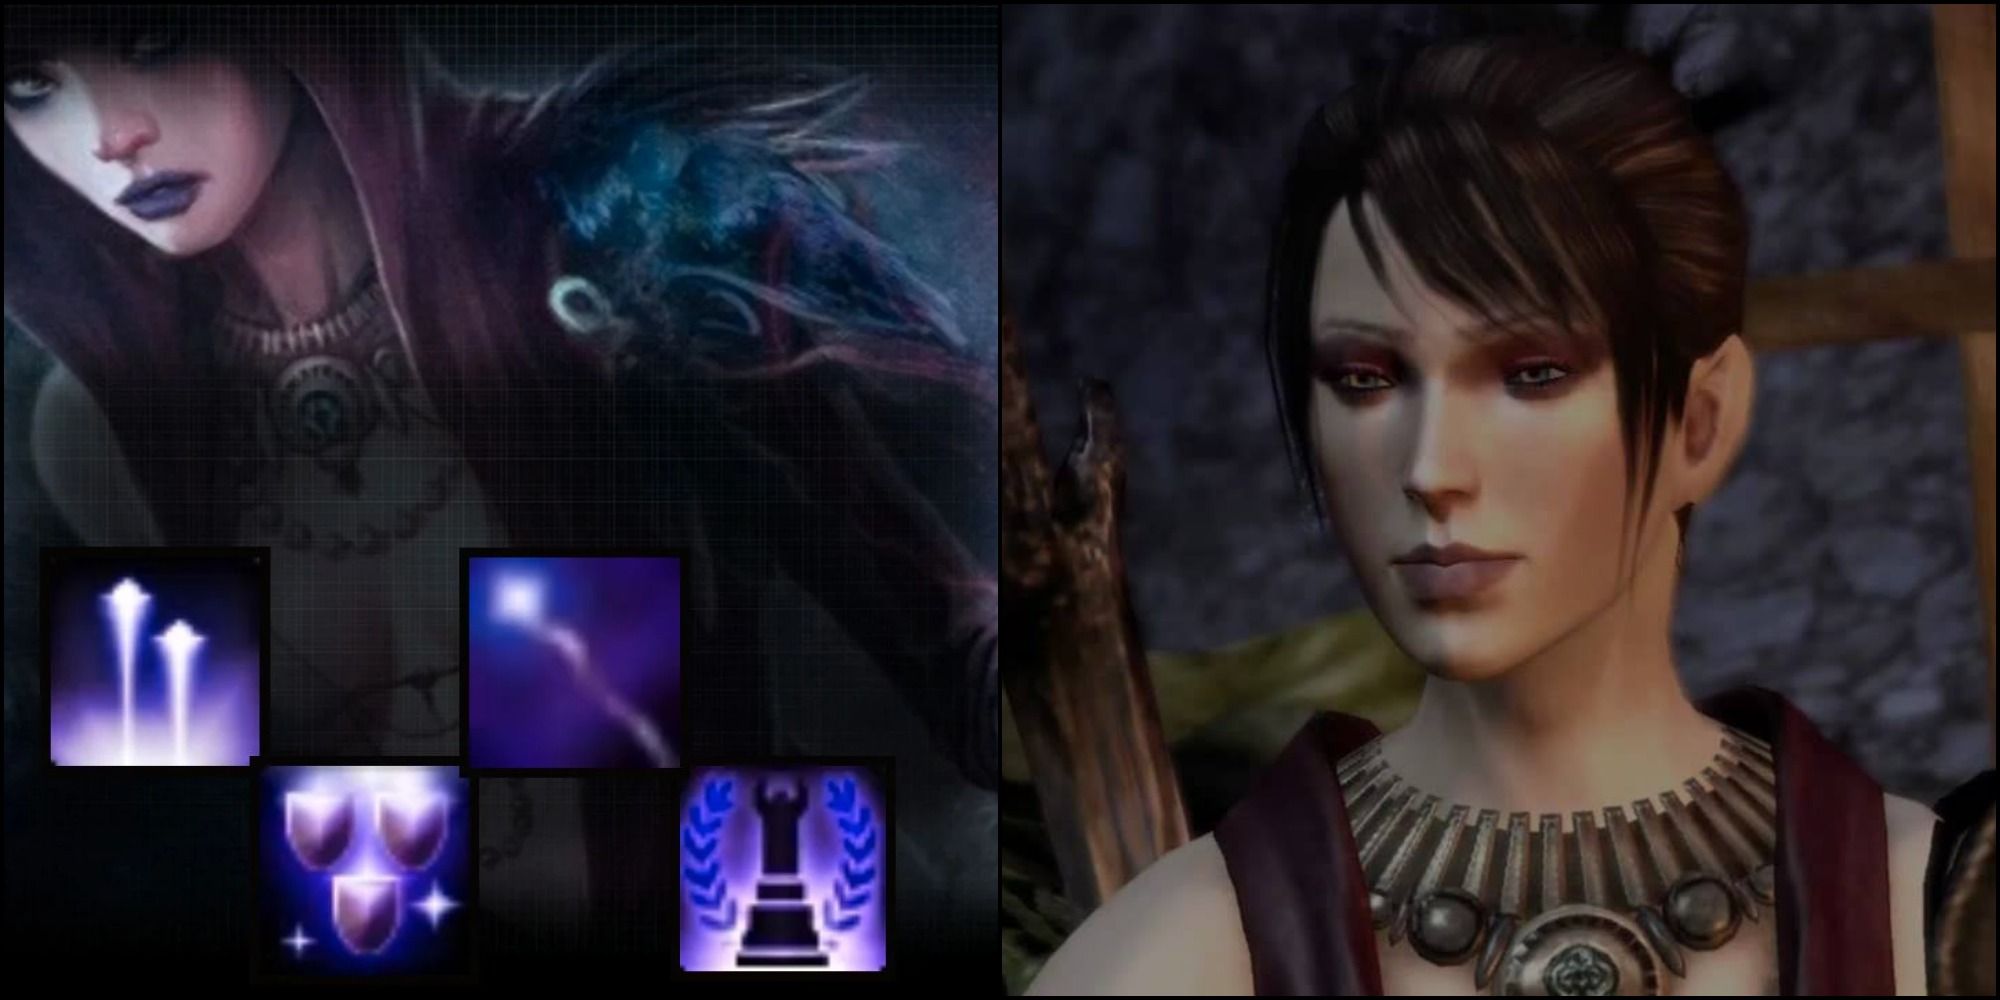 Split image showing mage skills on the left and the character Morrigan on the right.